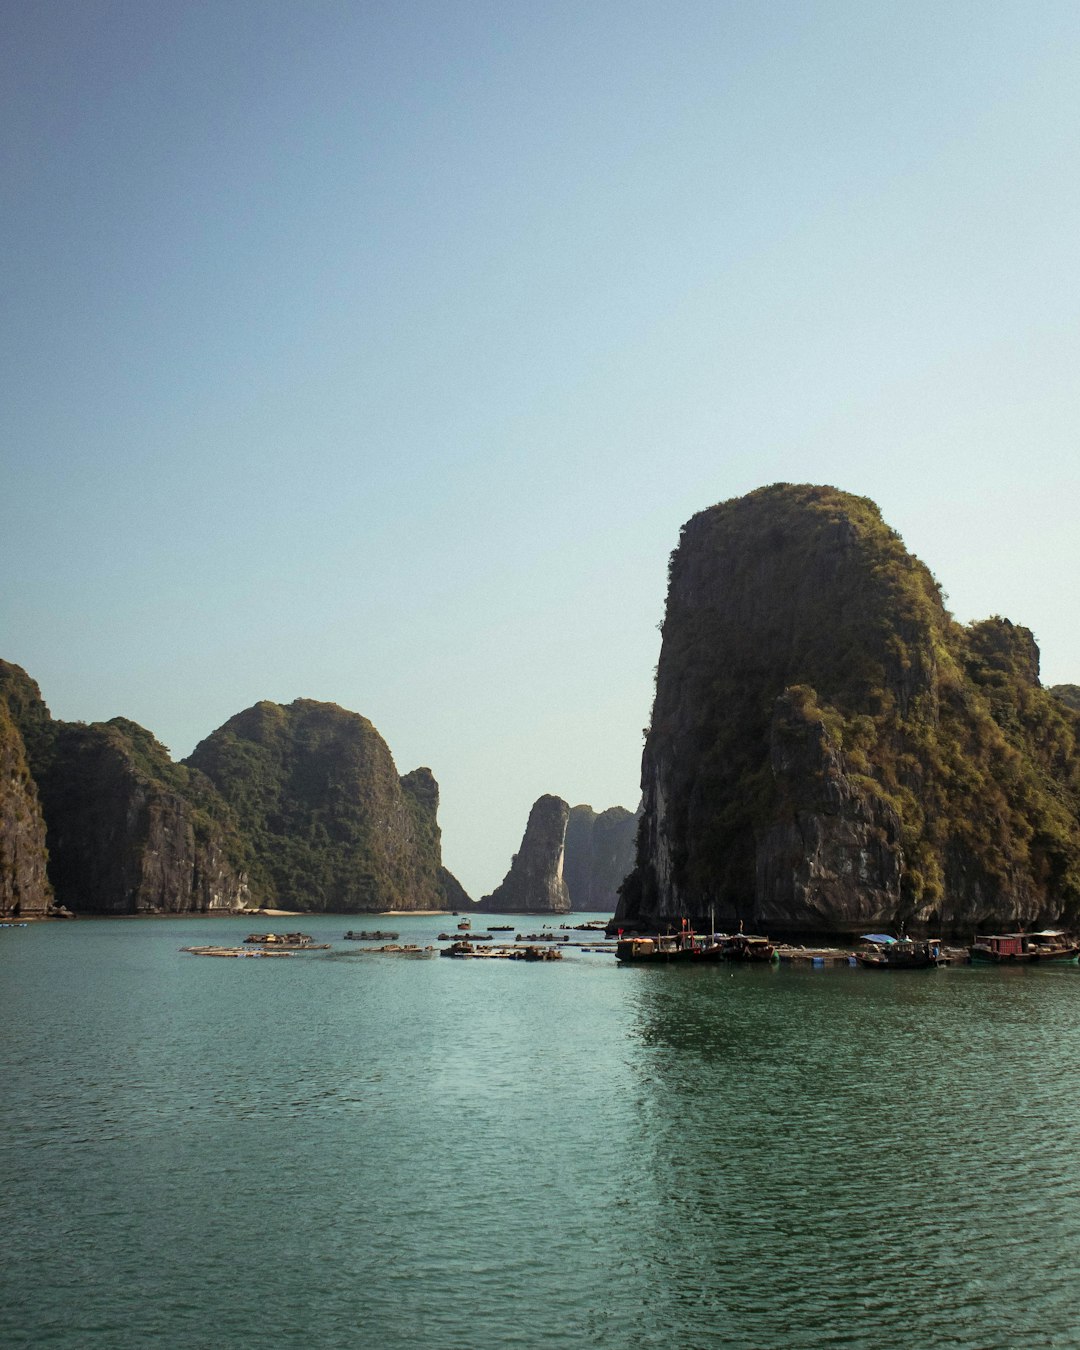 Travel Tips and Stories of Ha Long Bay in Vietnam